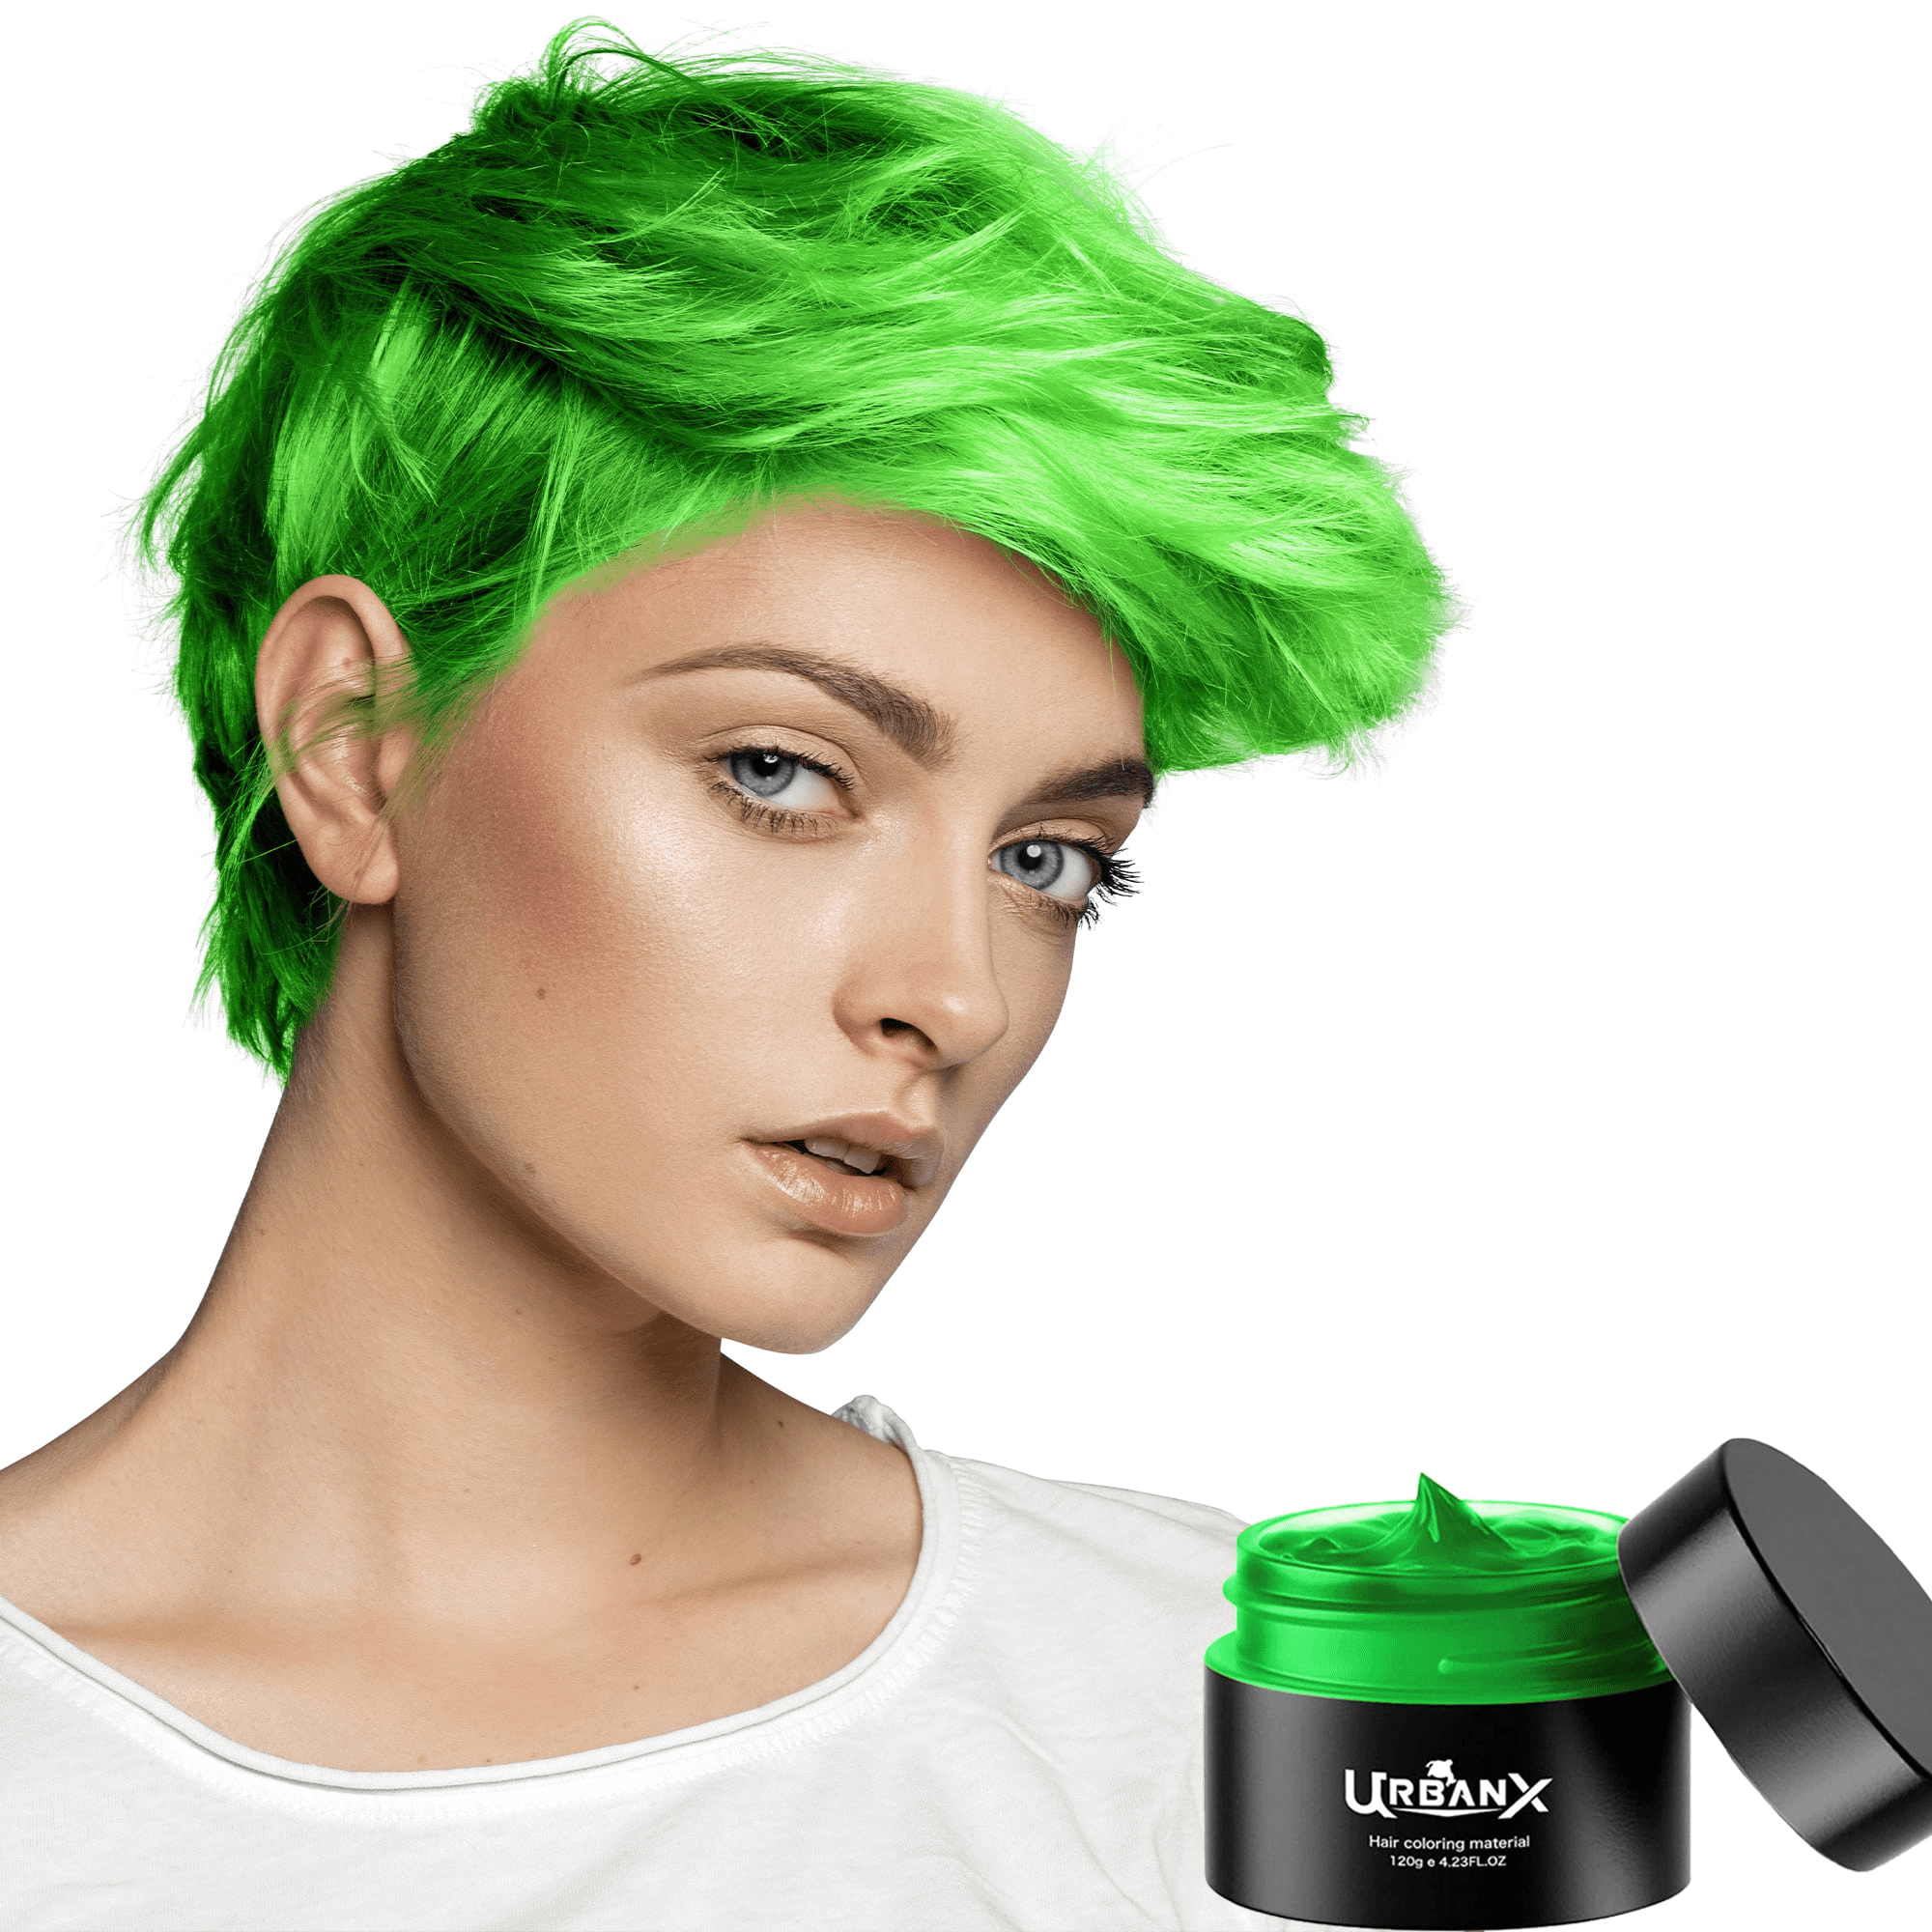 UrbanX Washable Hair Coloring Wax Material Unisex Color Dye Styling Cream  Natural Hairstyle for Updos Hair Style Pomade Temporary Party Cosplay  Natural Ingredients - Orange 